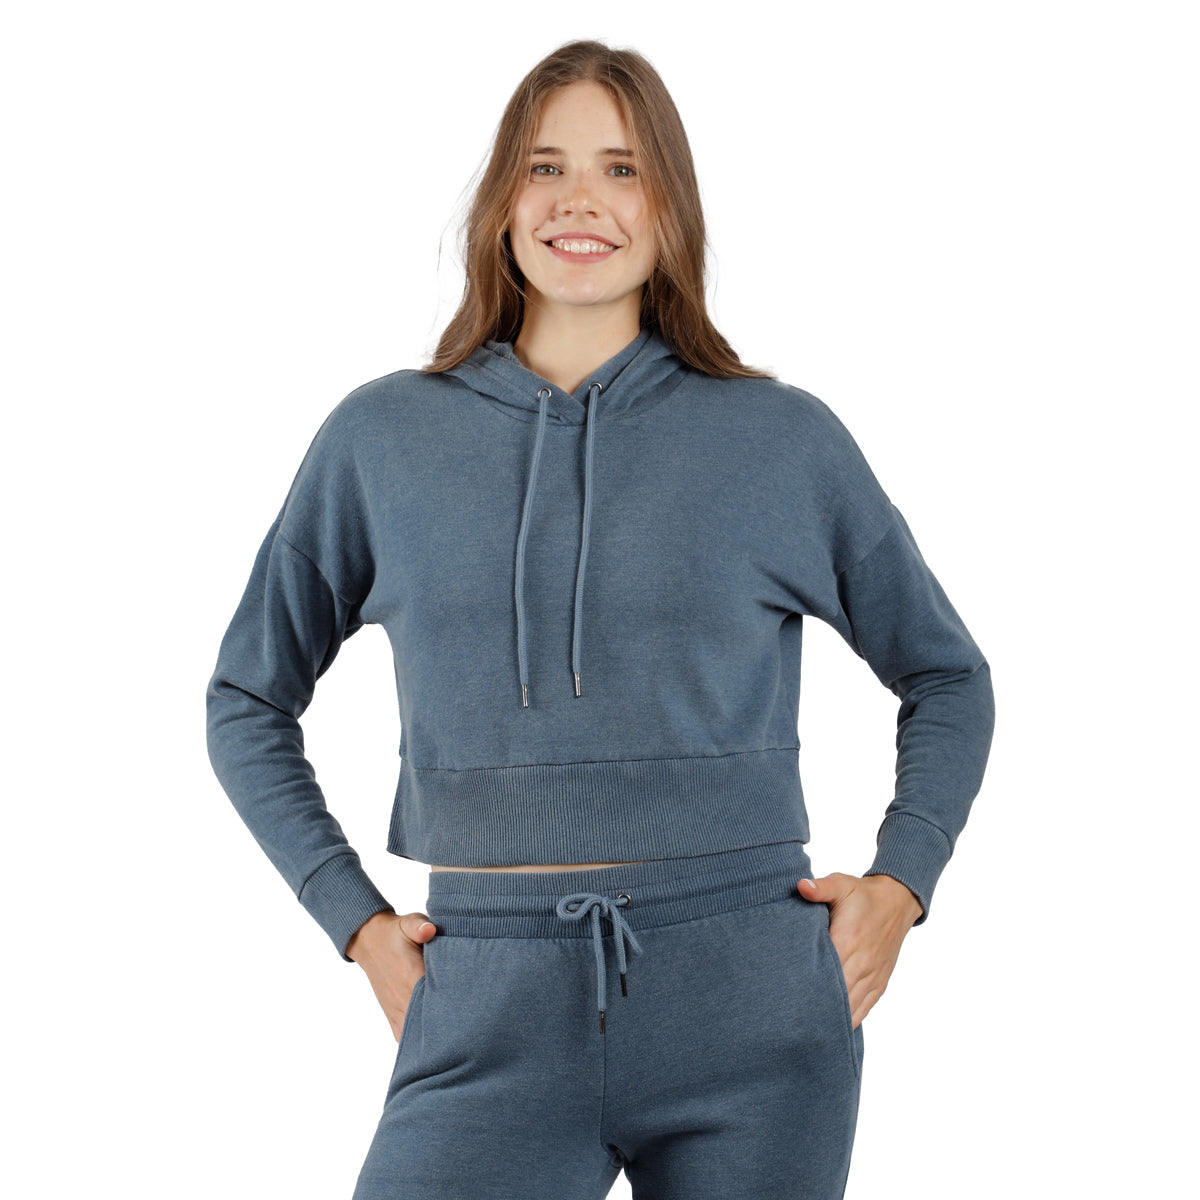 90 Degree By Reflex Women's Stone Washed Hoodie Sweatshirt (3 Colors) only  $11.99